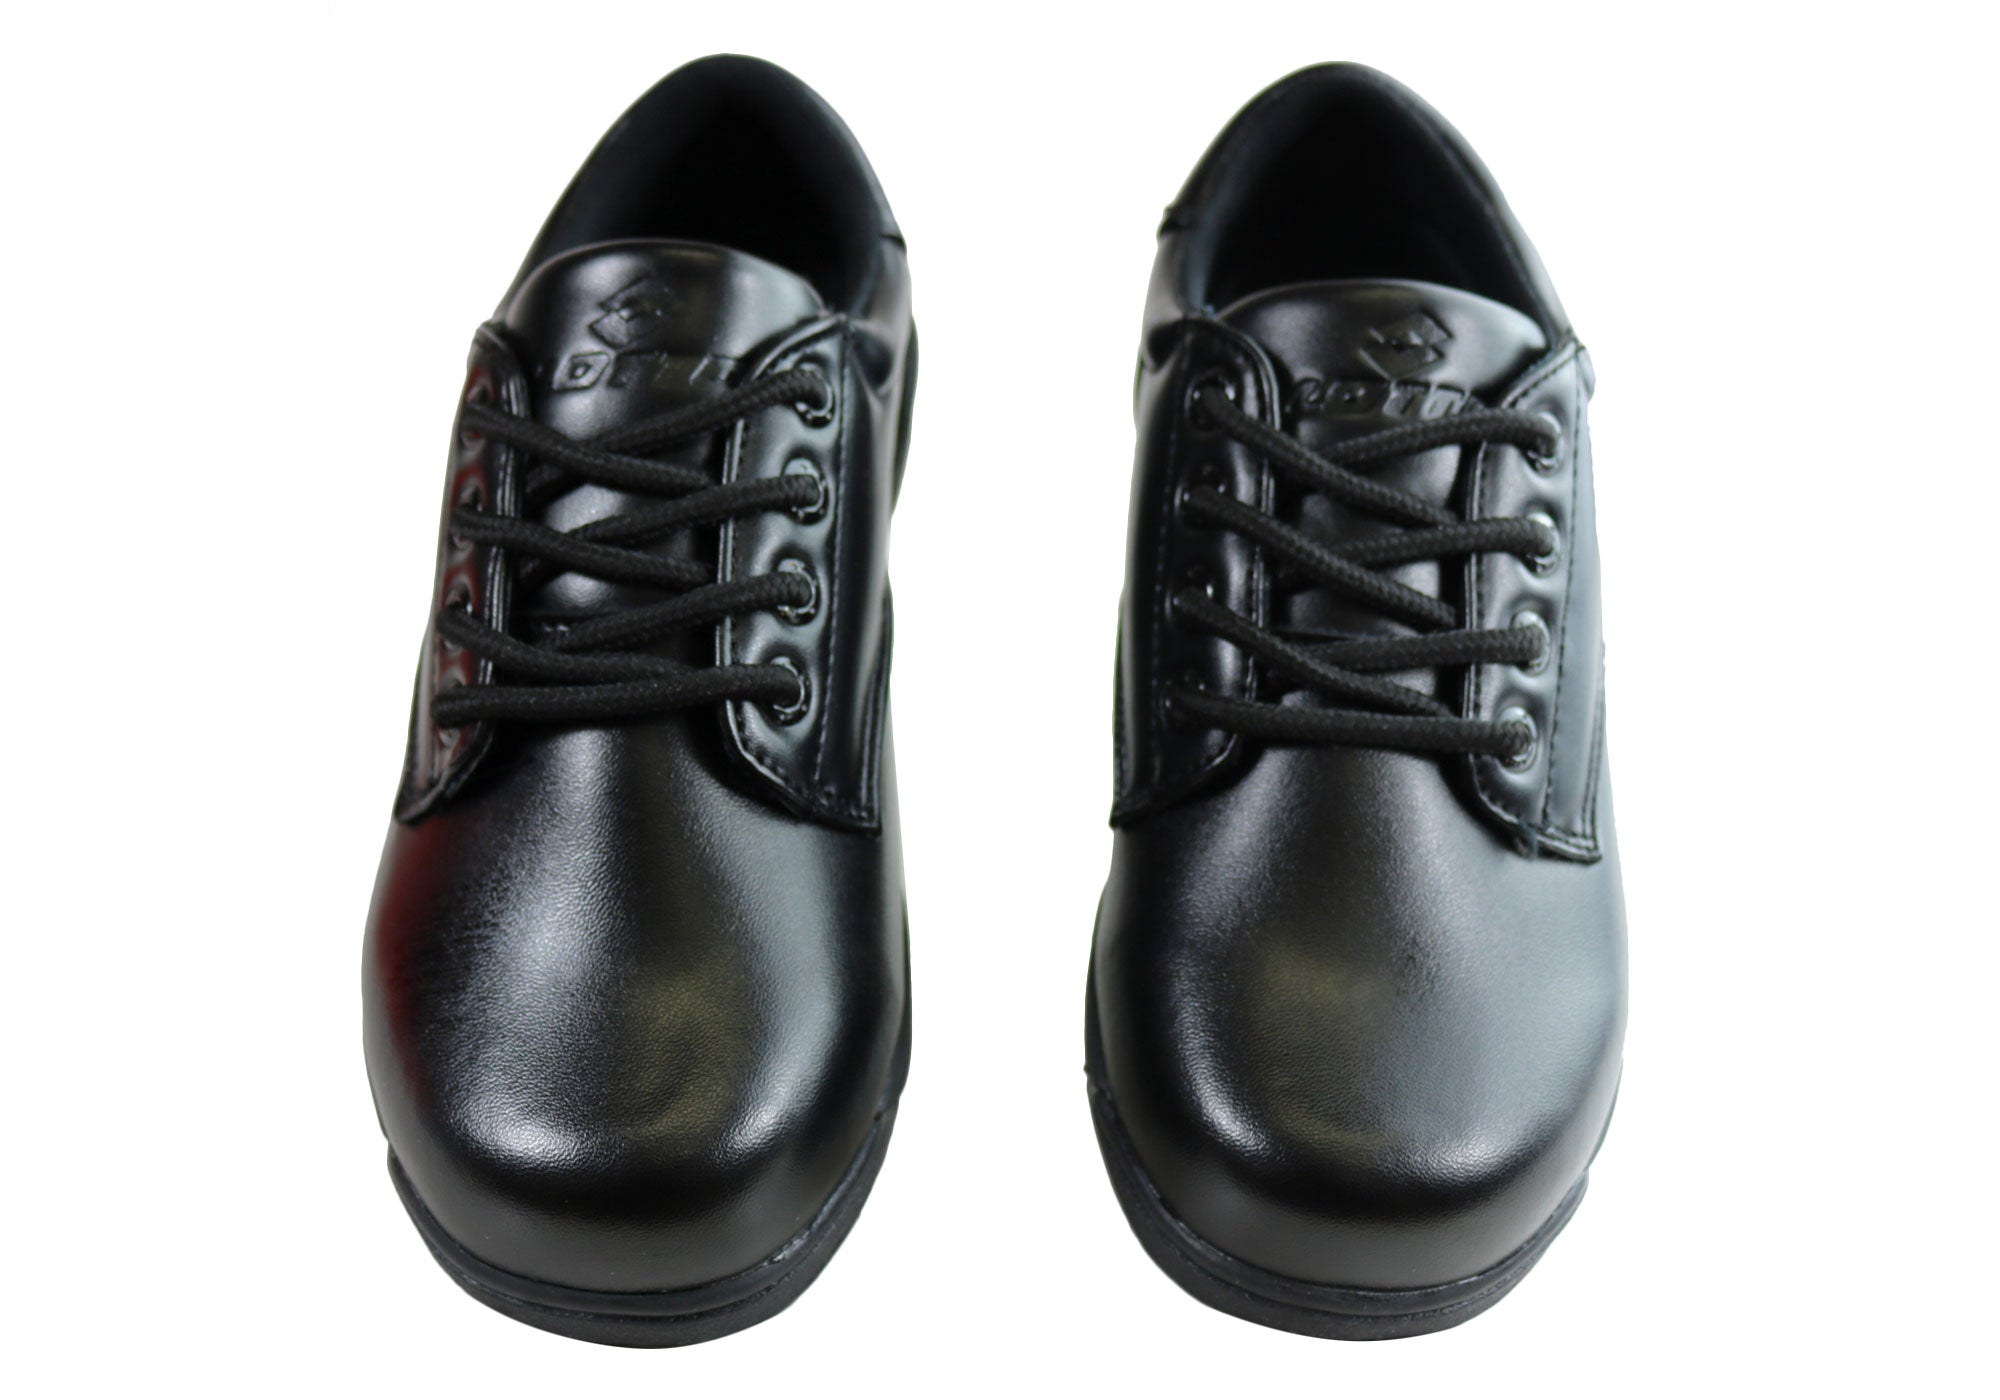 Lotto Study Youth Kids Lace Up Leather School Shoes